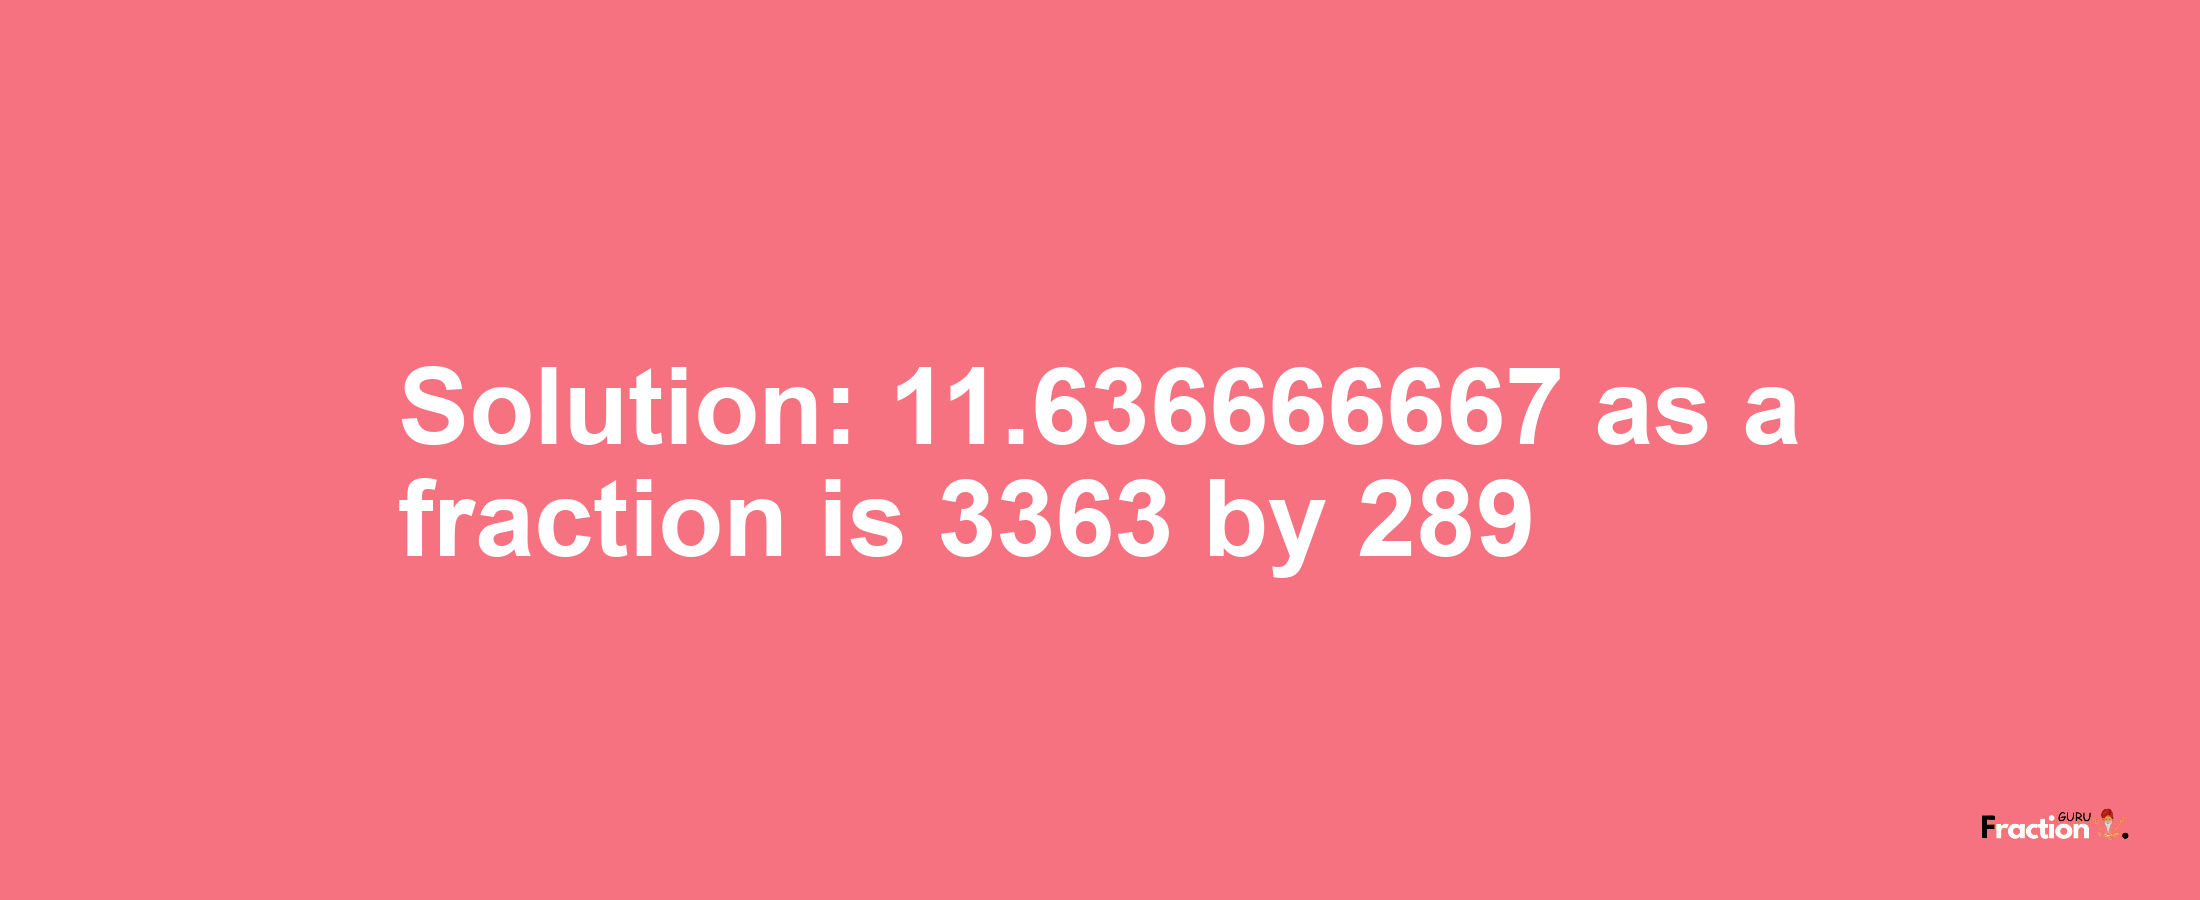 Solution:11.636666667 as a fraction is 3363/289